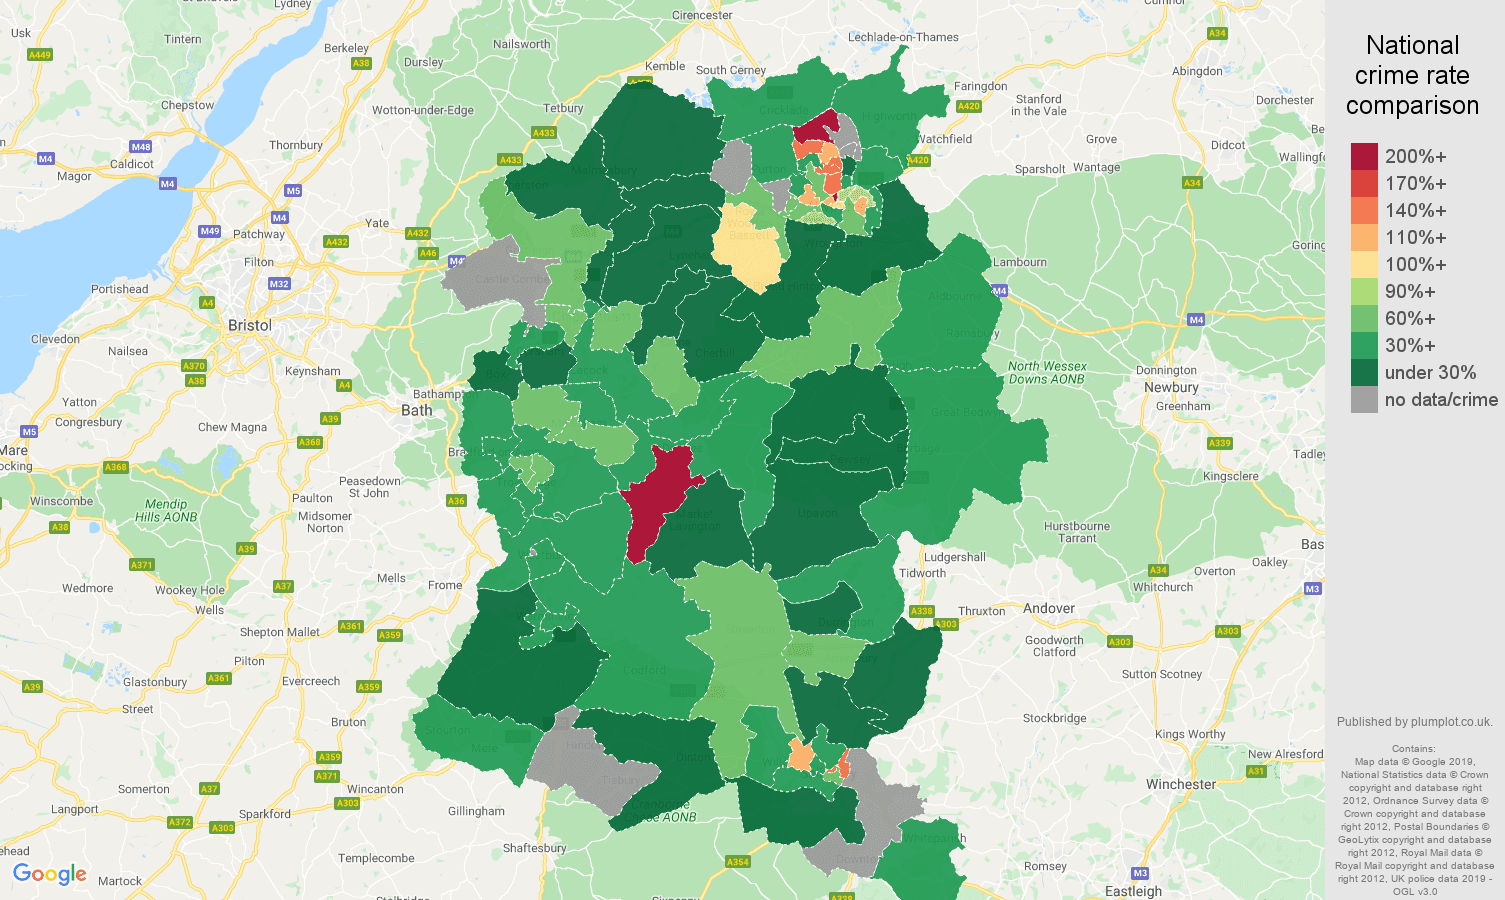 Wiltshire other crime rate comparison map